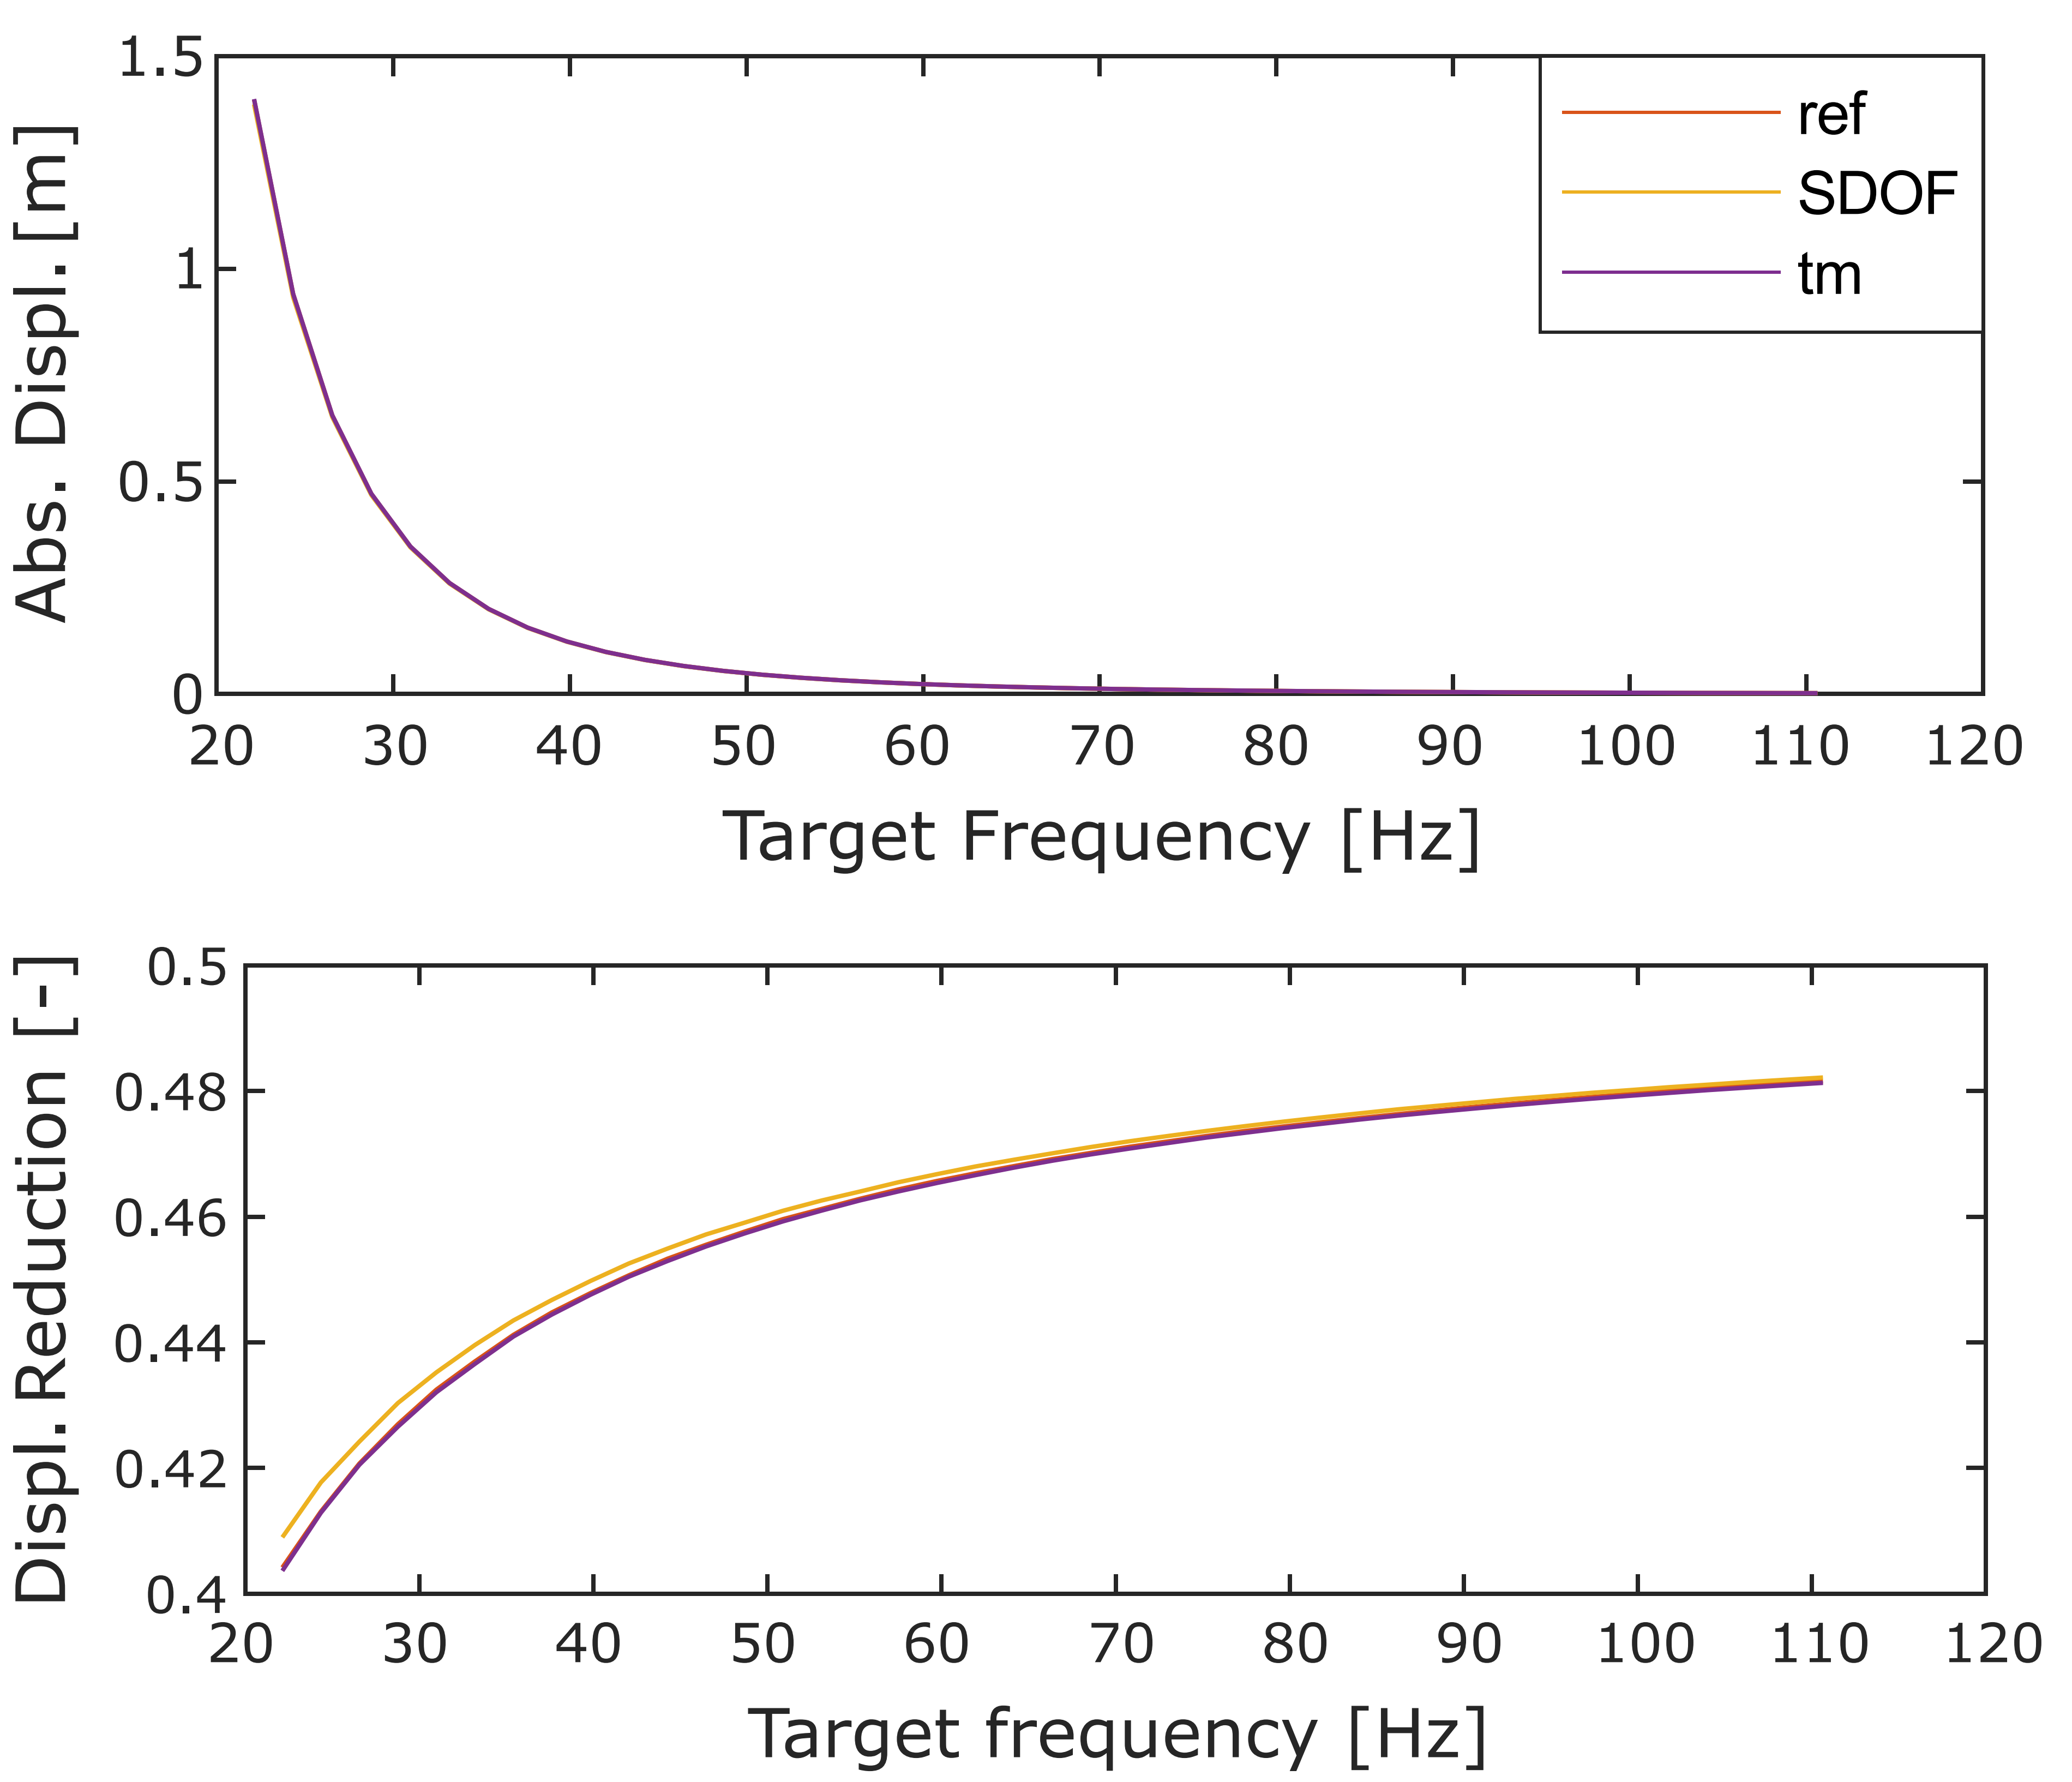 Absolute displacement and displacement reduction for different target frequencies